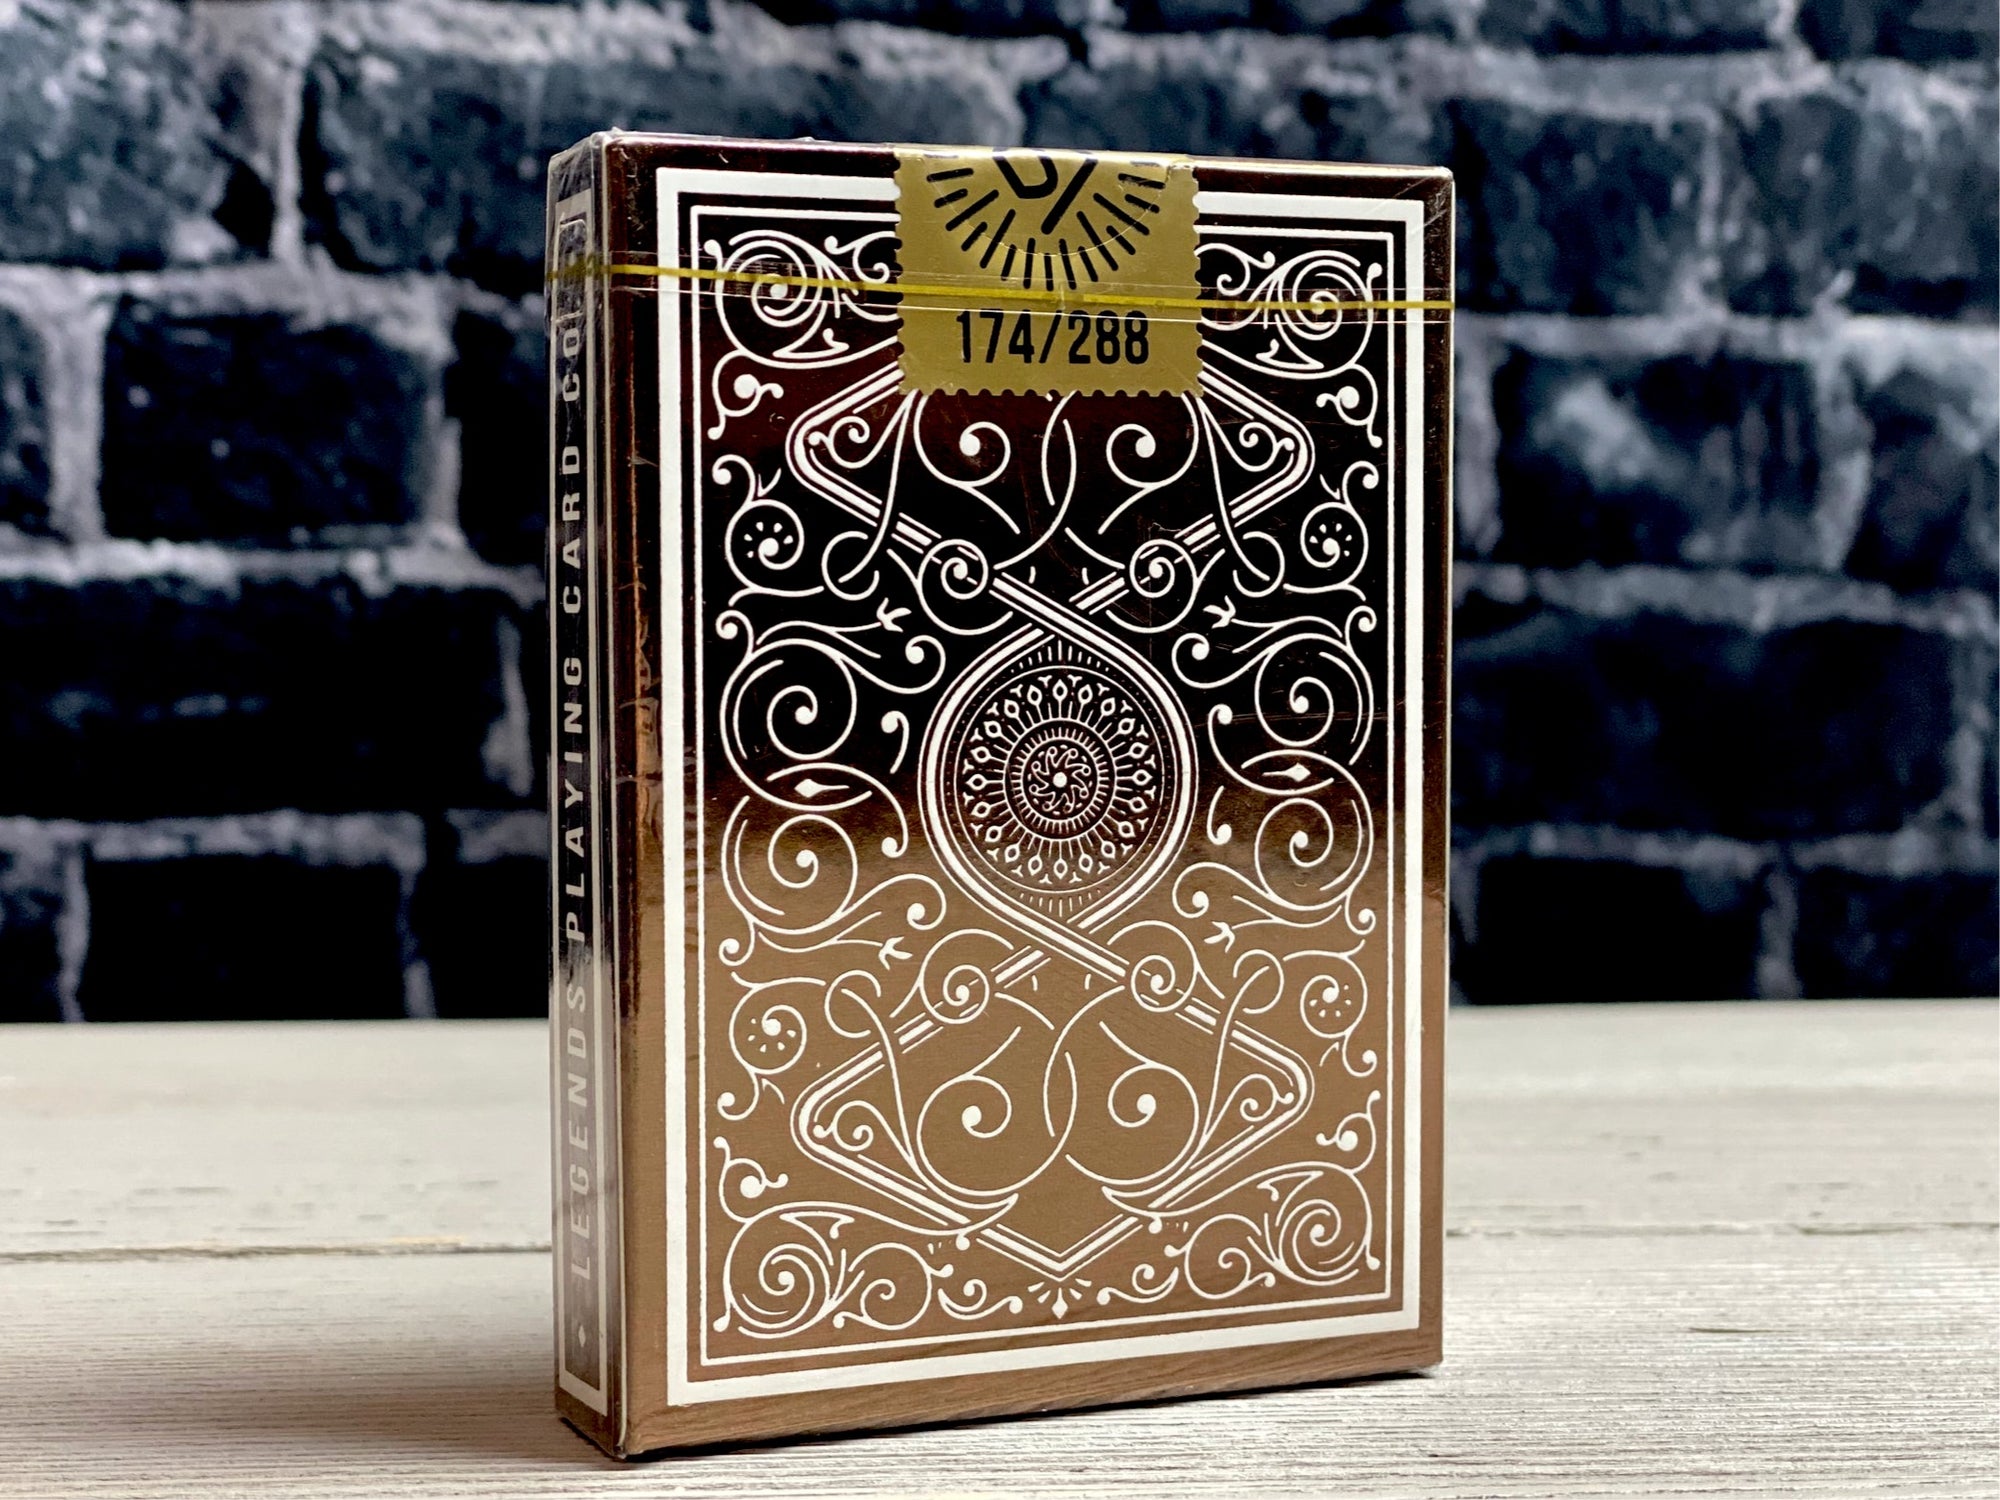 Copperhead Playing Cards - Legends